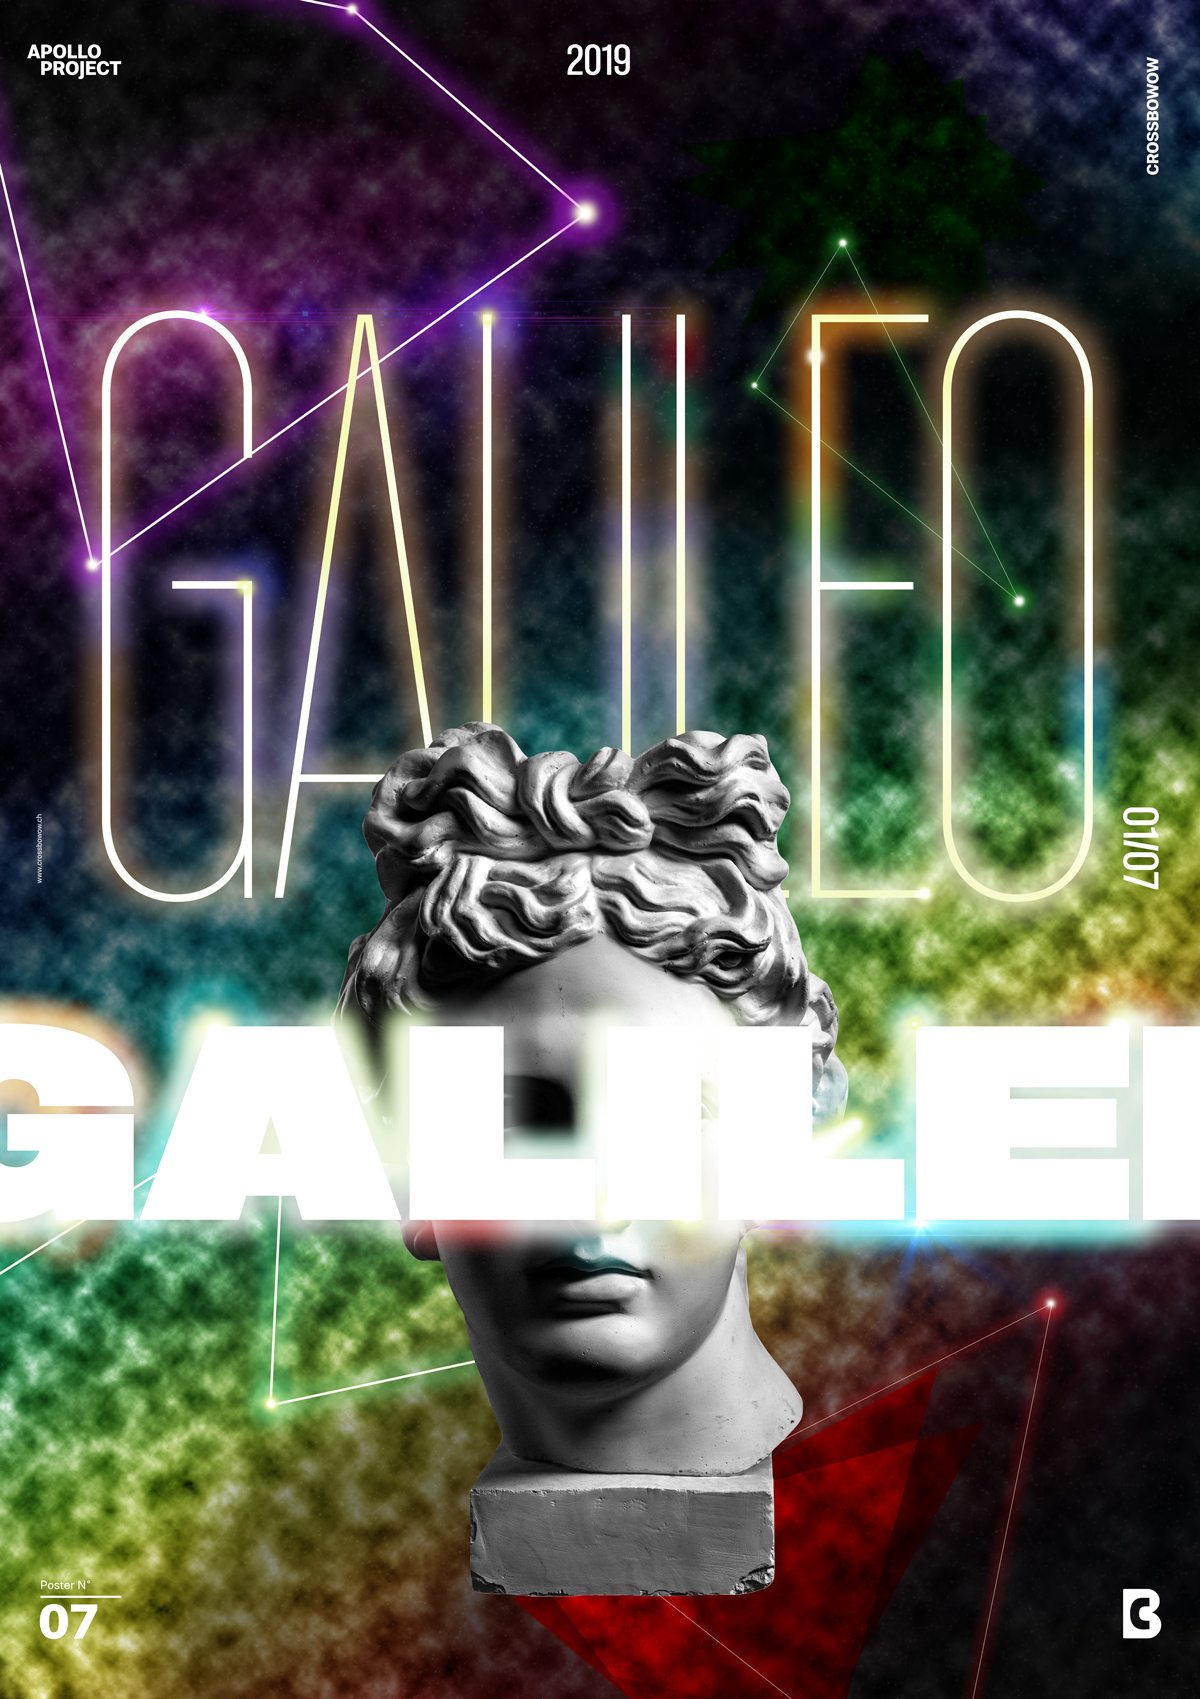 The Final Design of the Poster Art Number 7 Galileo Galilei